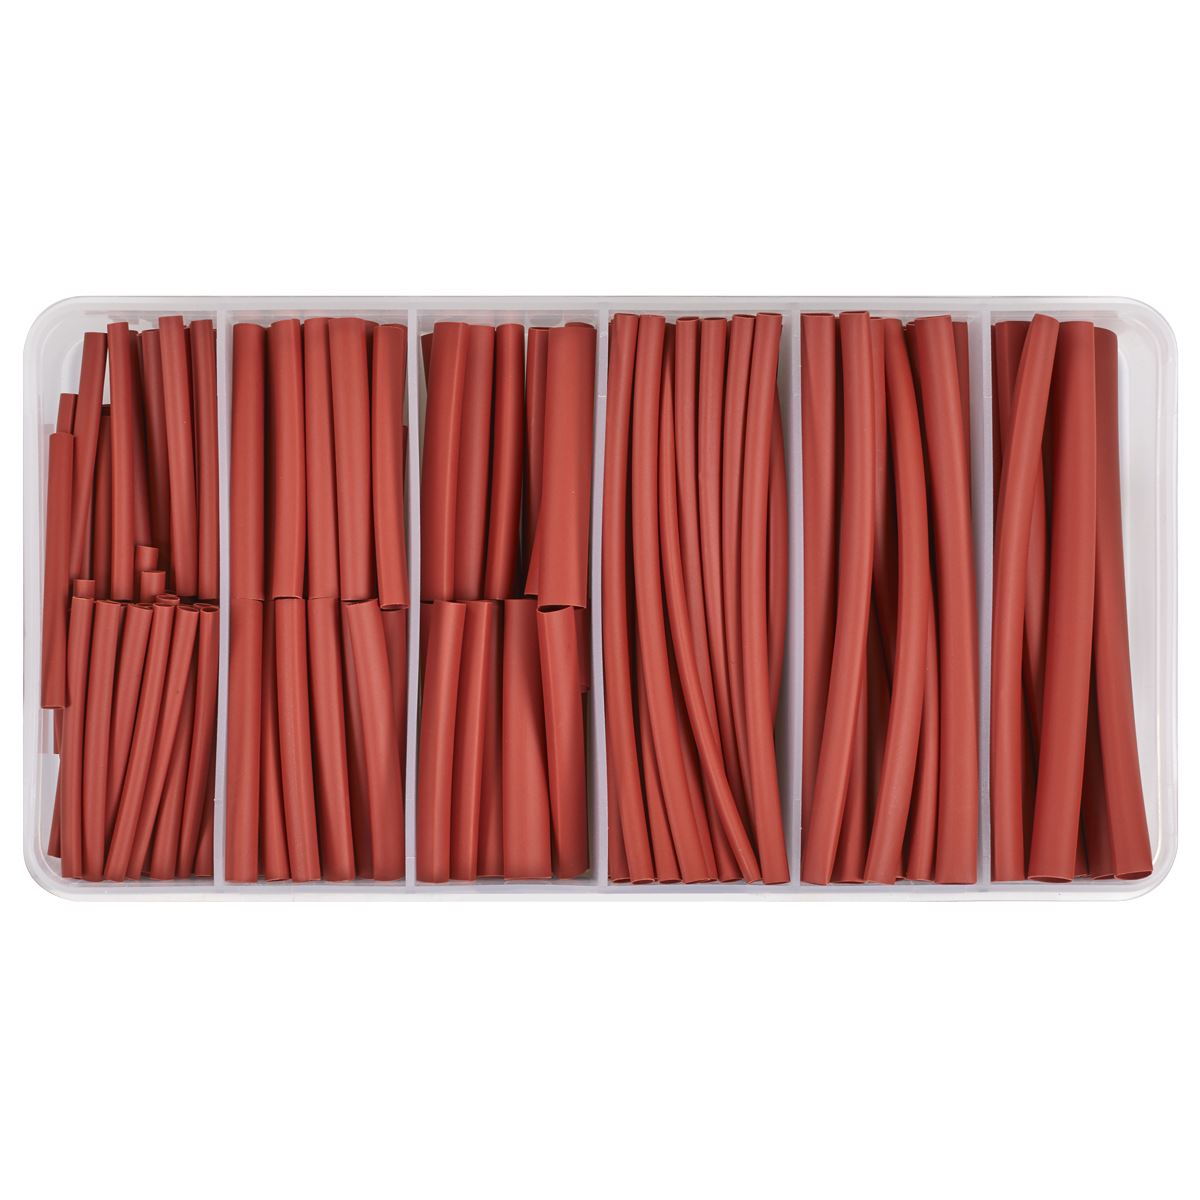 Sealey Heat Shrink Tubing Assortment 180pc 50 & 100mm Red